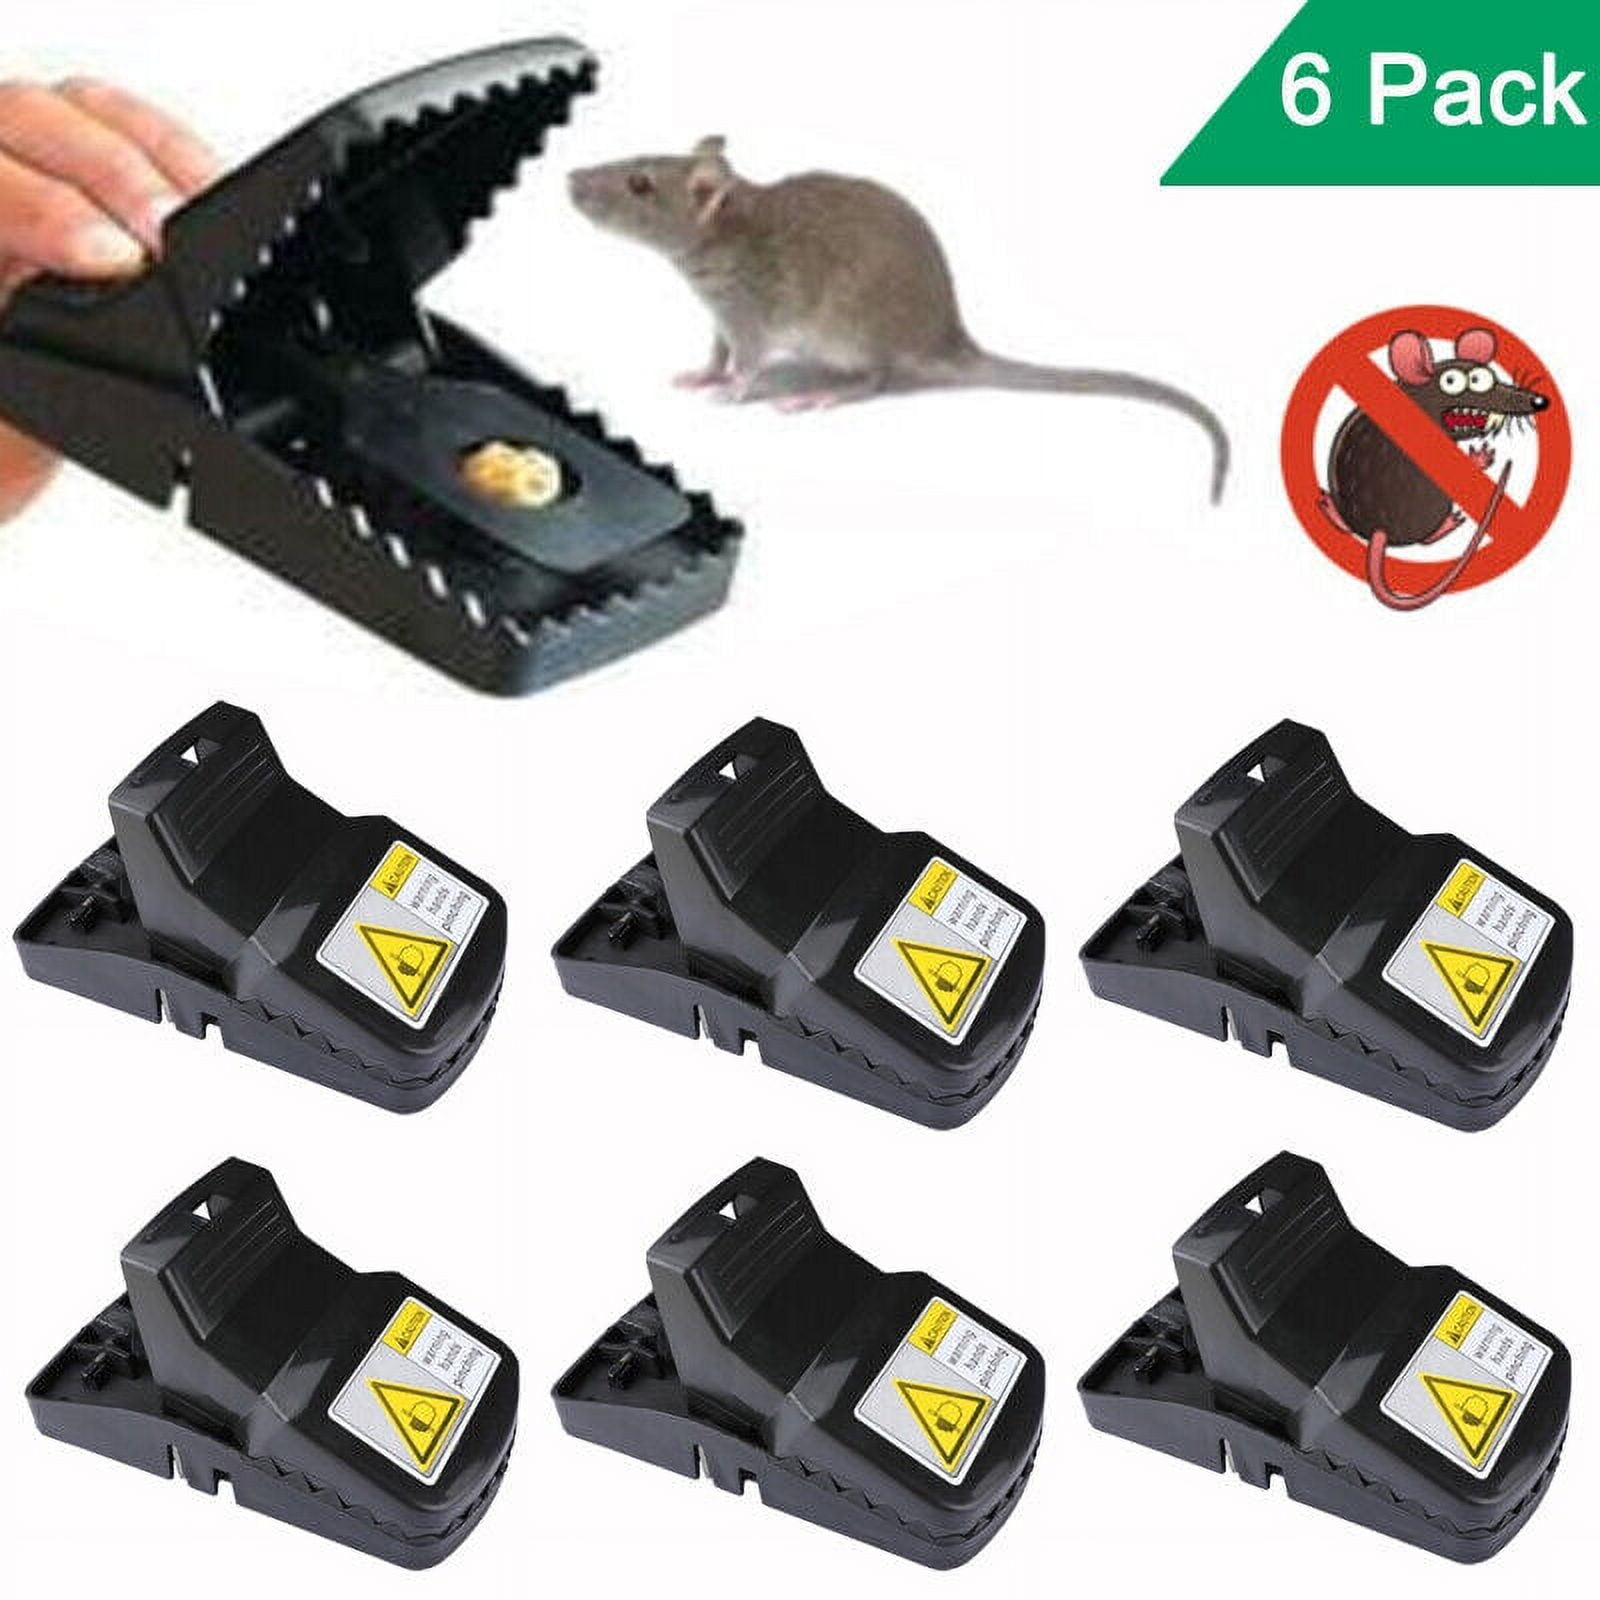 Mouse Trap, Easy To Bait Rodent Killer, Reusable Snap Mice Trap